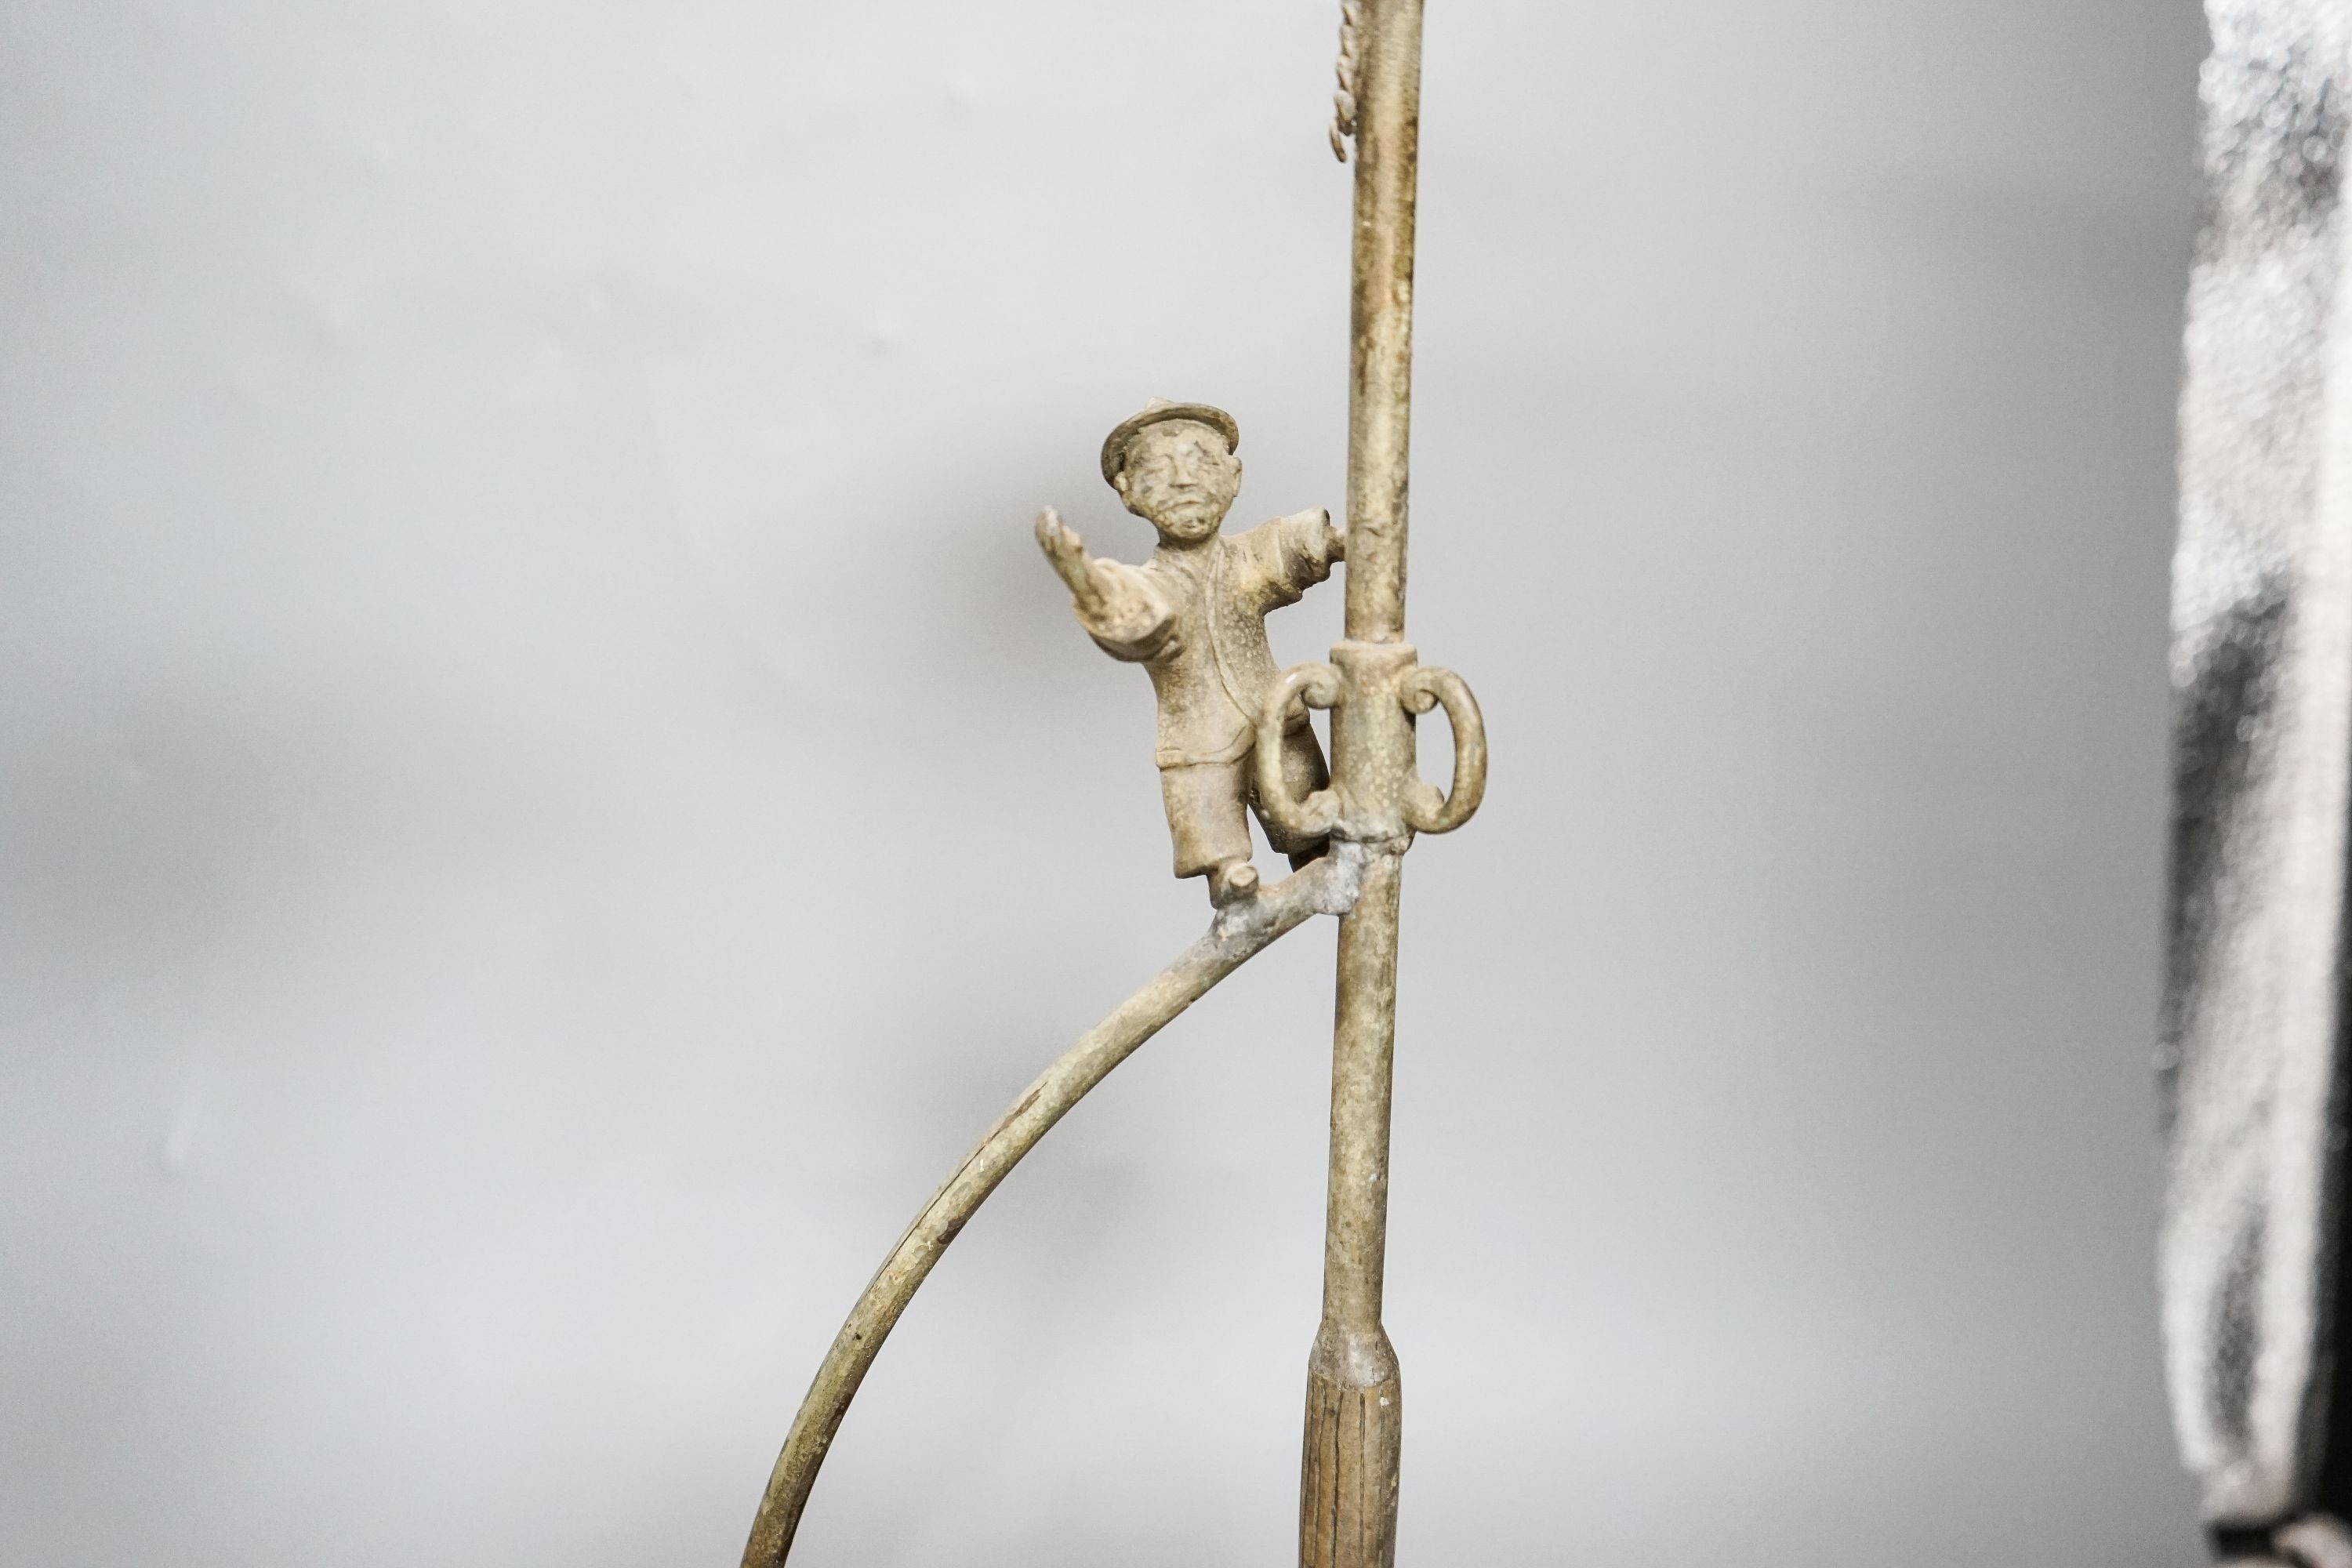 A pair of Chinese brass ‘ship’ lamp stands, 41cm